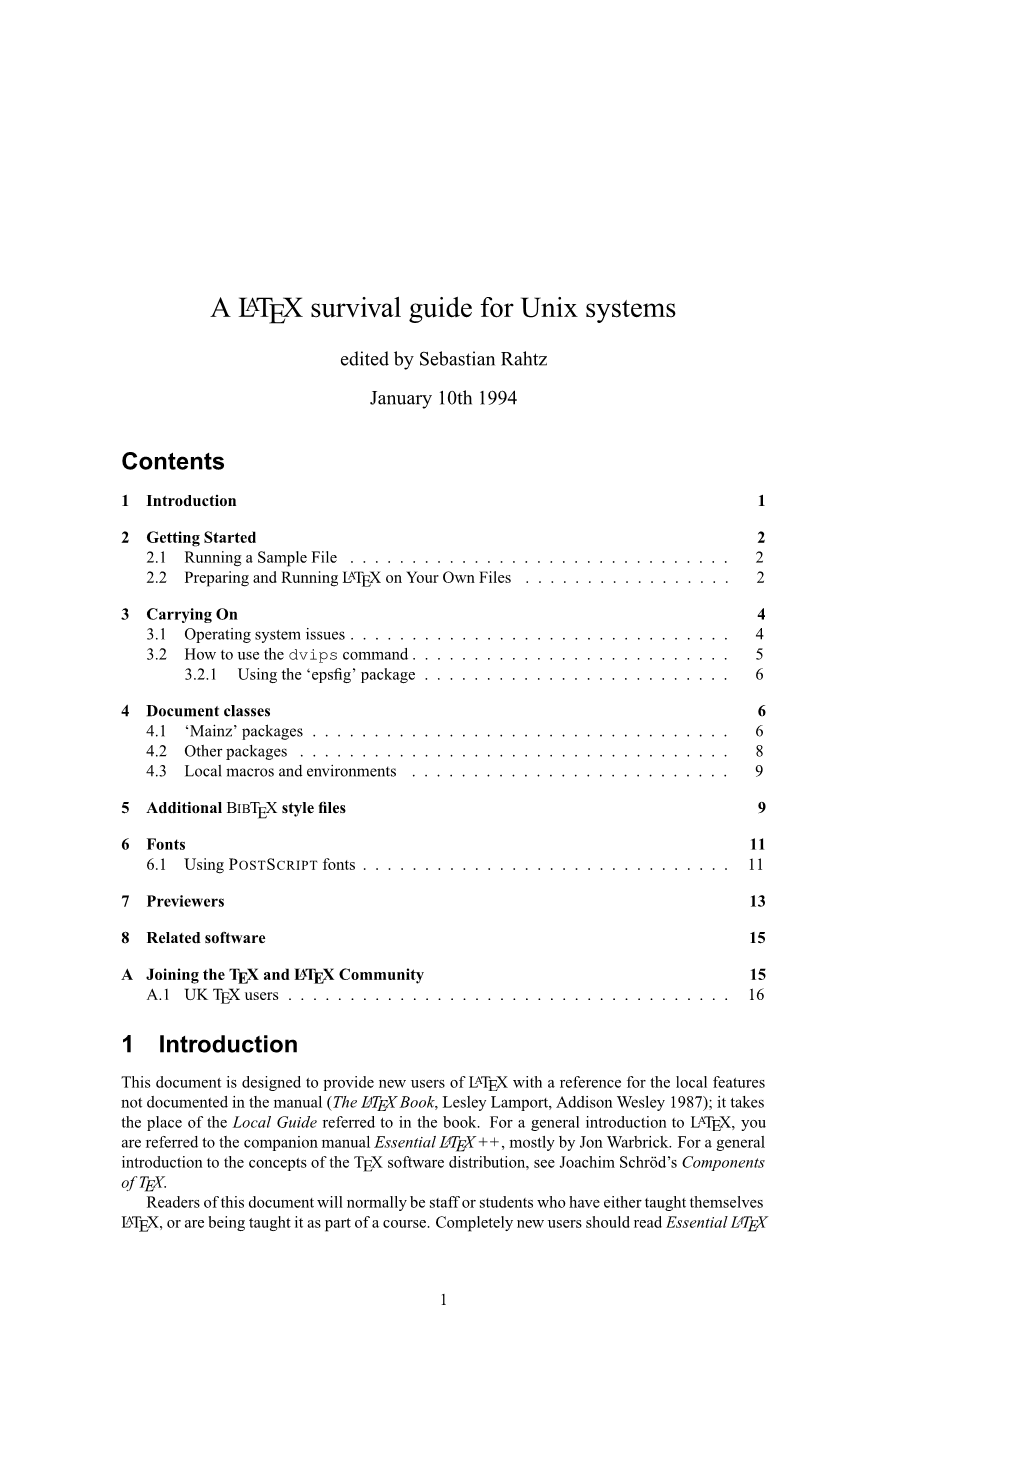 A LATEX Survival Guide for Unix Systems